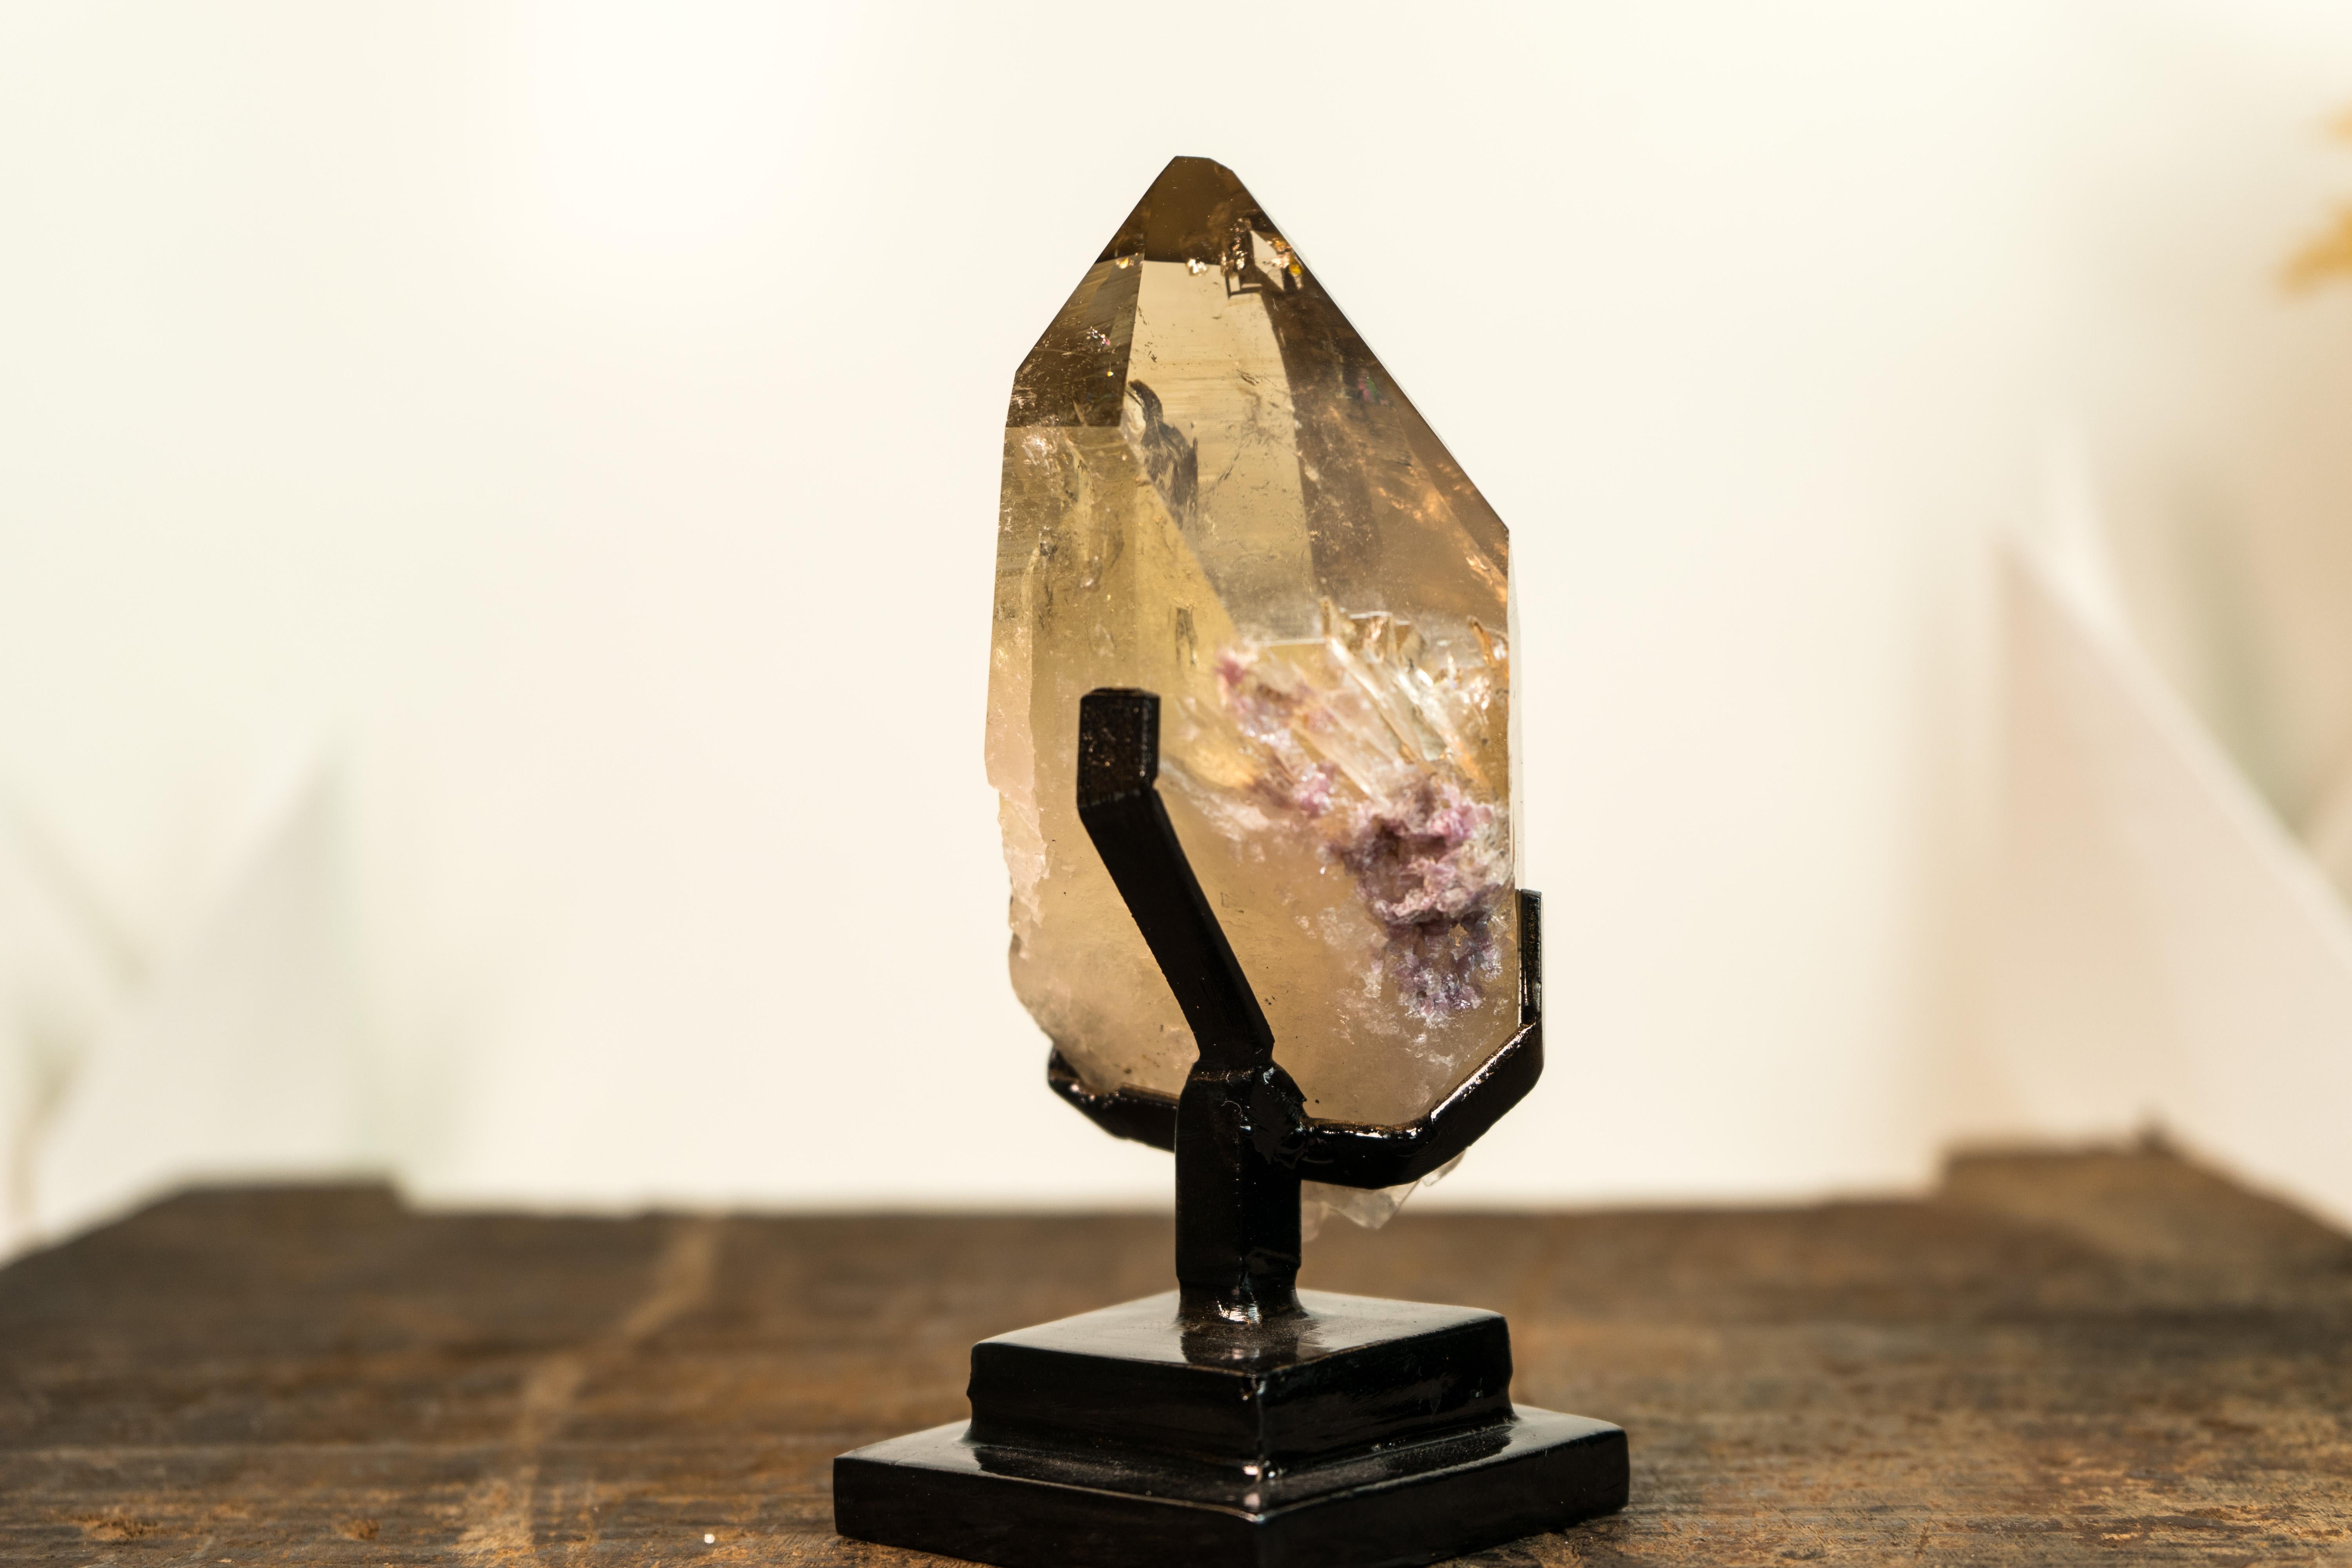 Beautifully formed and showcasing one of the rarest and most sought-after colors, Golden Yellow Citrine, this natural Citrine represents the pinnacle of crystal beauty and rarity. This masterpiece is sure to be an extraordinary addition to any